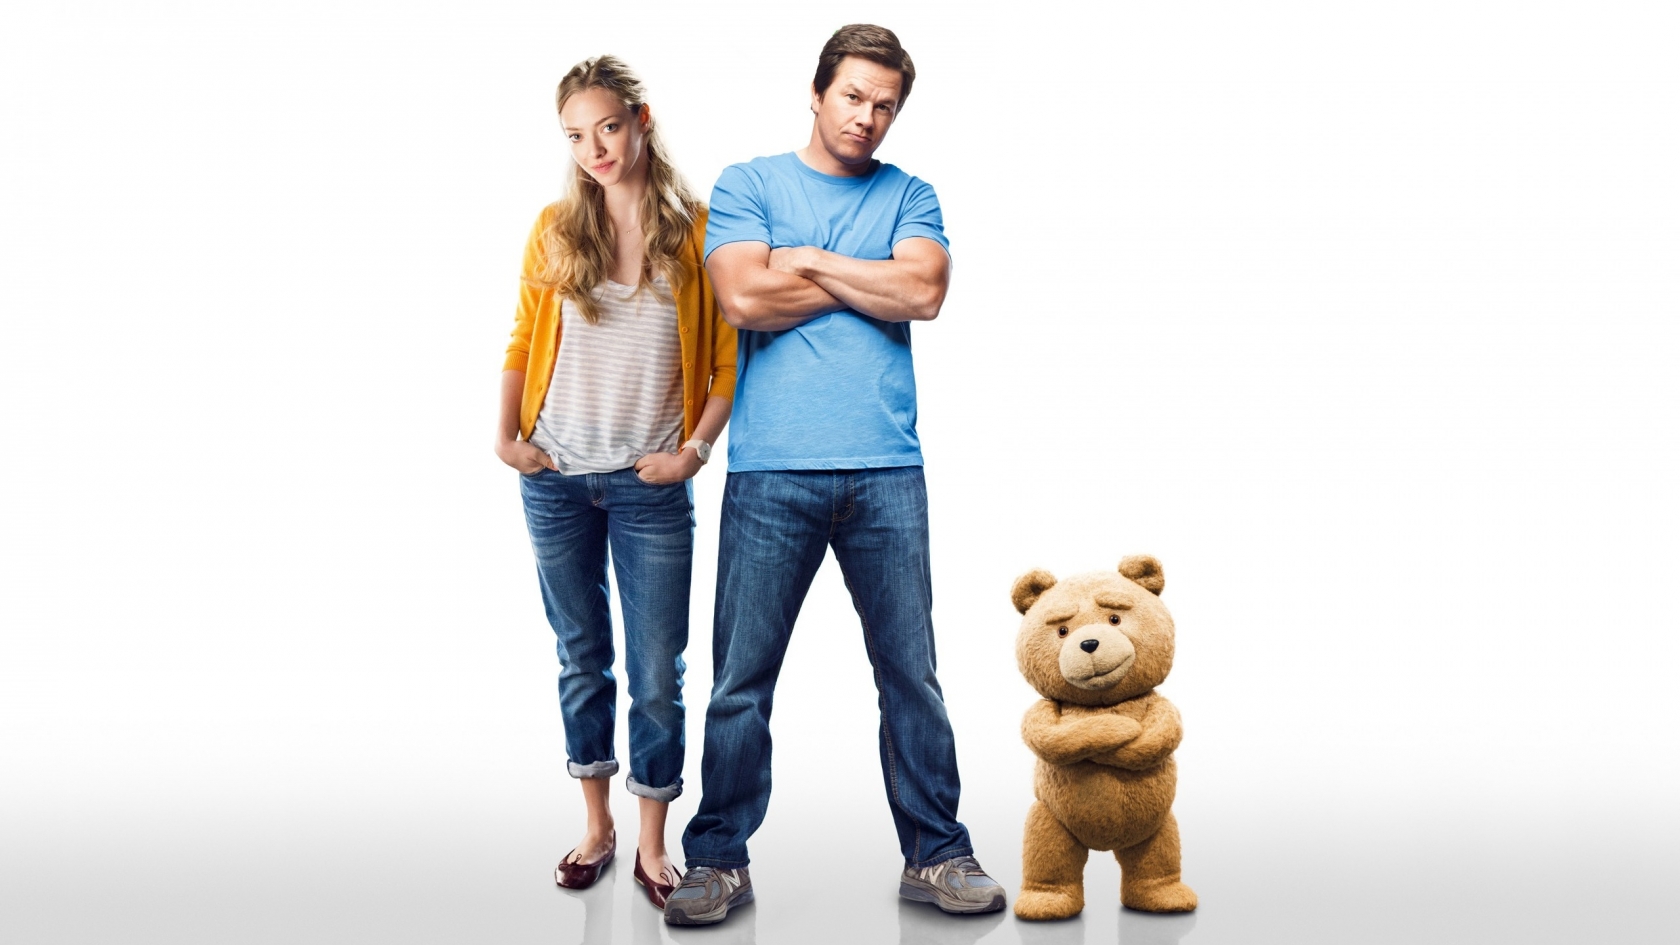 Ted 2 for 1680 x 945 HDTV resolution